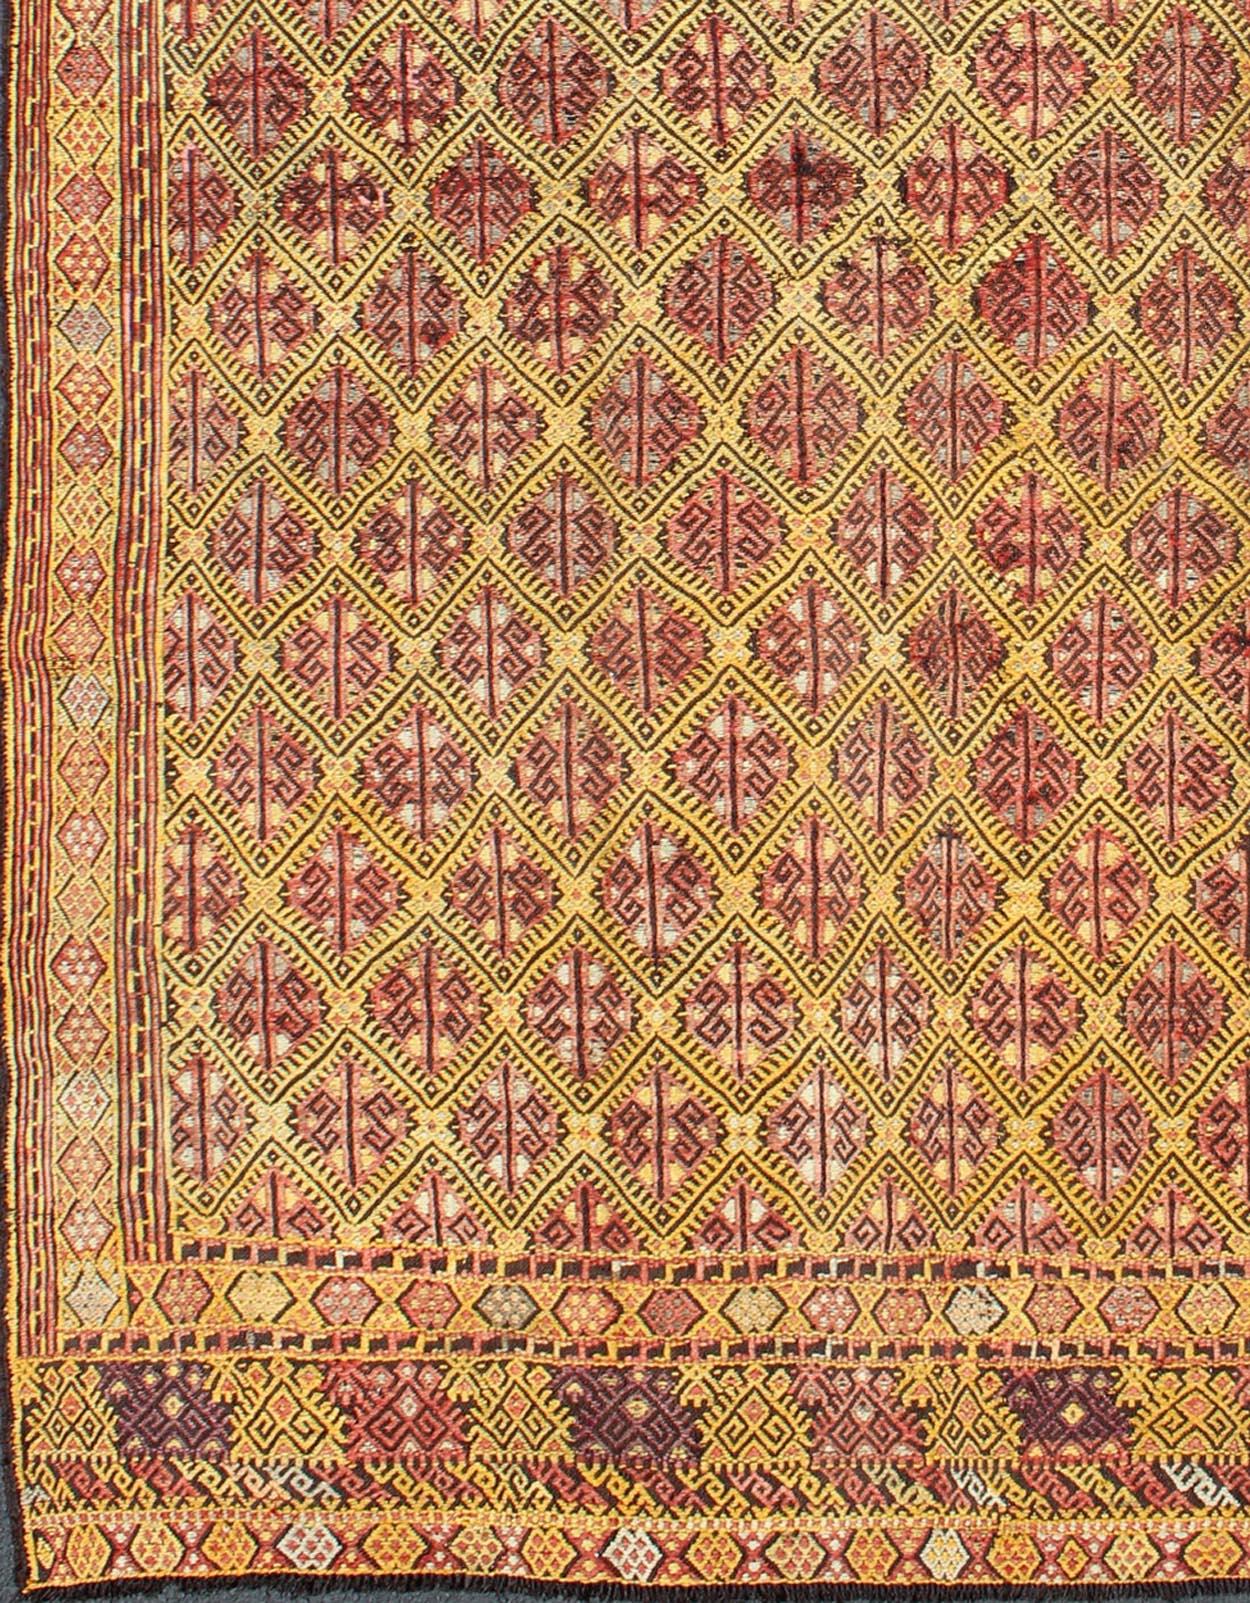              Vintage Turkish Embroidered Kilim Rug with All-Over Diamond Design In Green.
  This colorful vintage, 20th century embroidered Kilim rug features an all-over diamond pattern woven with a well-preserved and vibrant color palette of